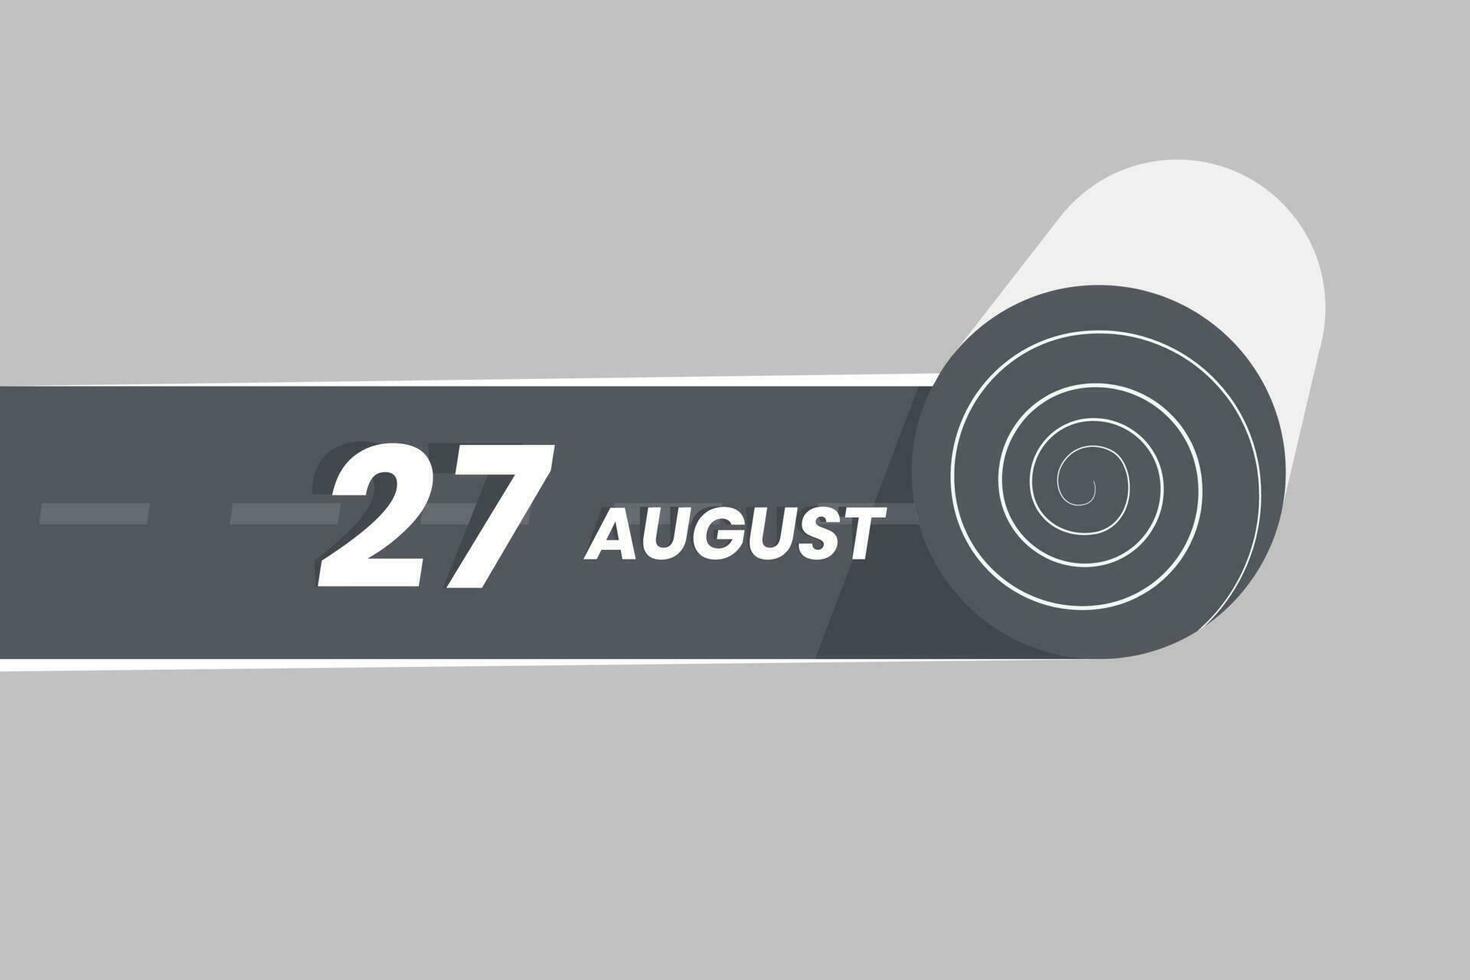 August 27 calendar icon rolling inside the road. 27 August Date Month icon vector illustrator.